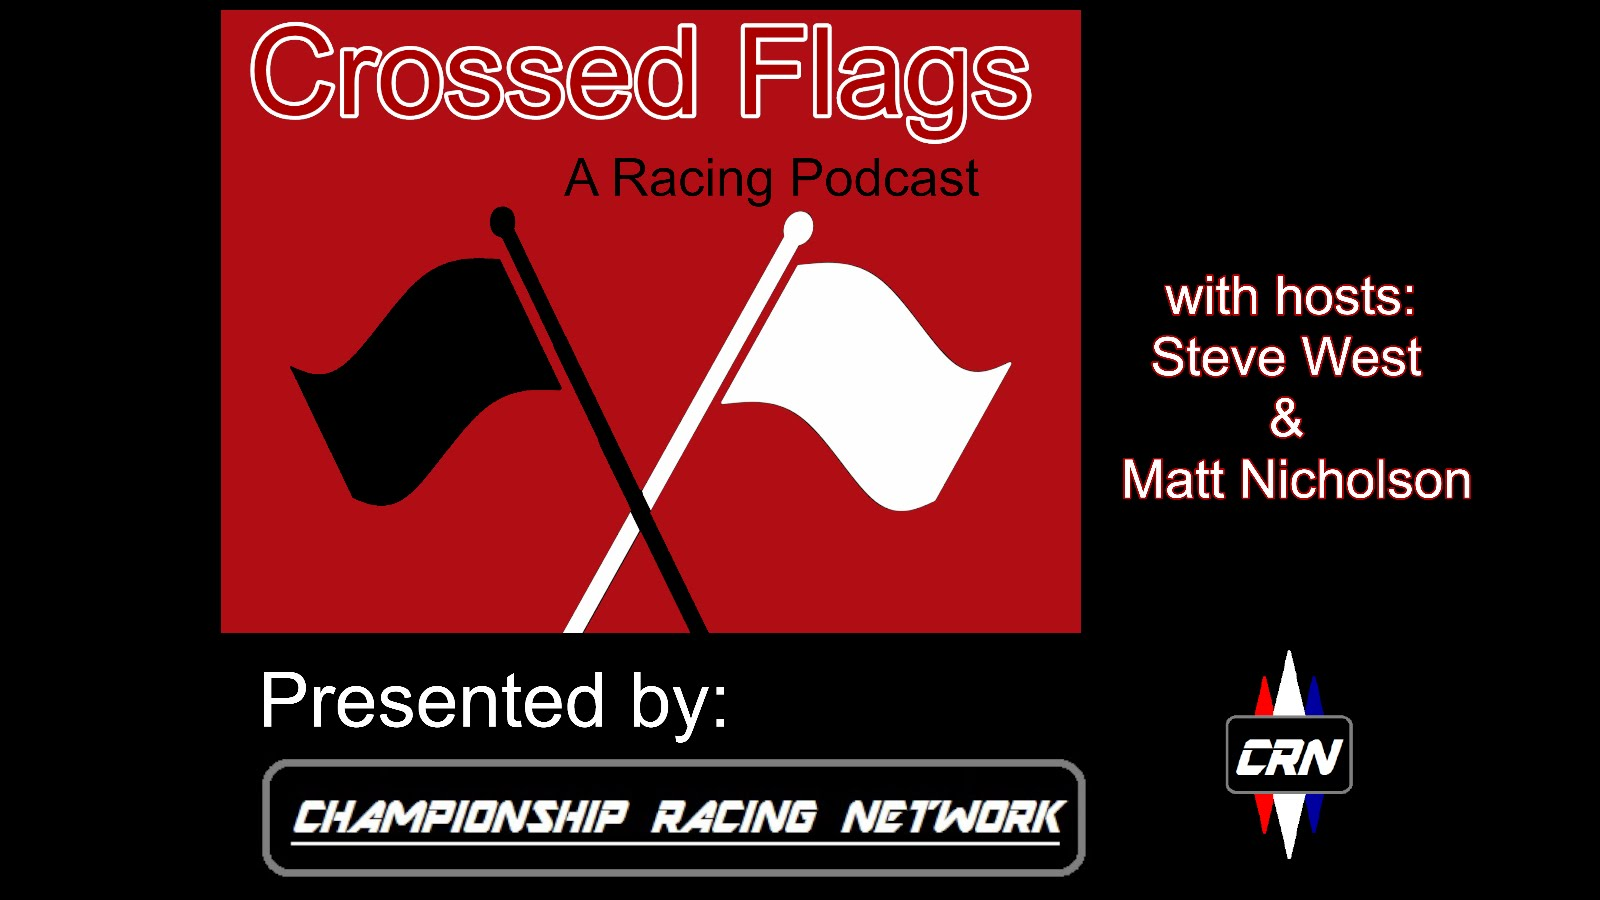 Crossed Flags Episode 20: A weekend full of question marks